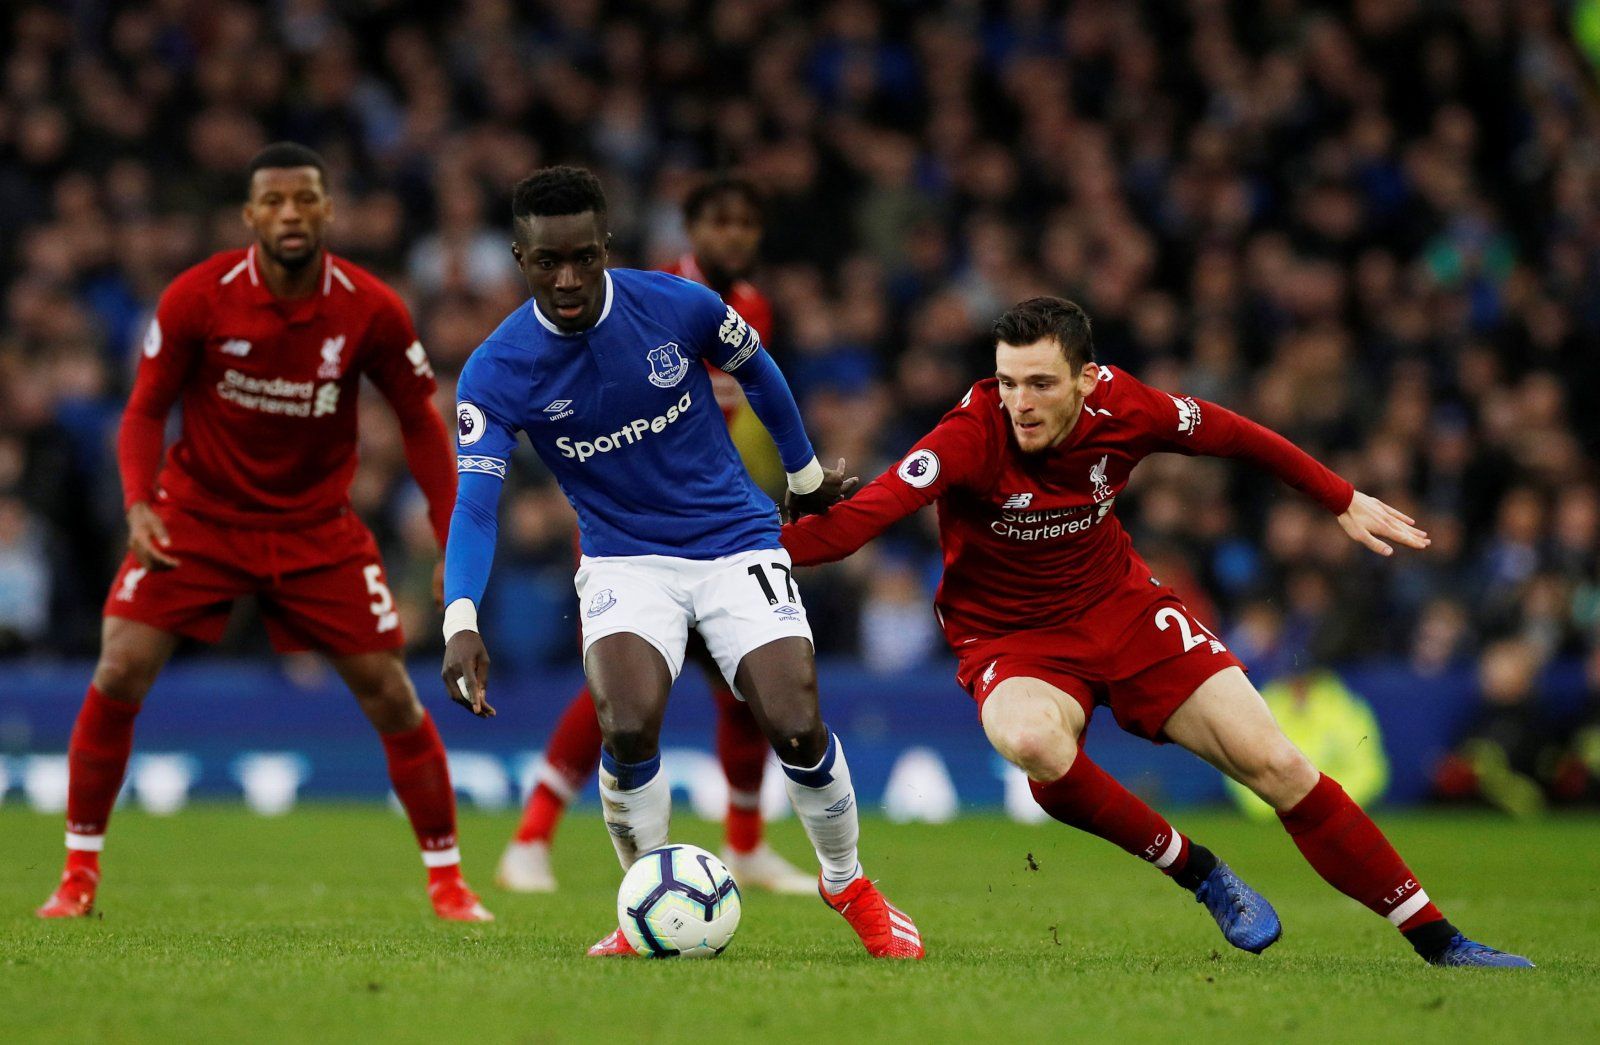 Everton: Fans want Idrissa Gueye back as he is likely to leave PSG -Everton Transfer Rumours